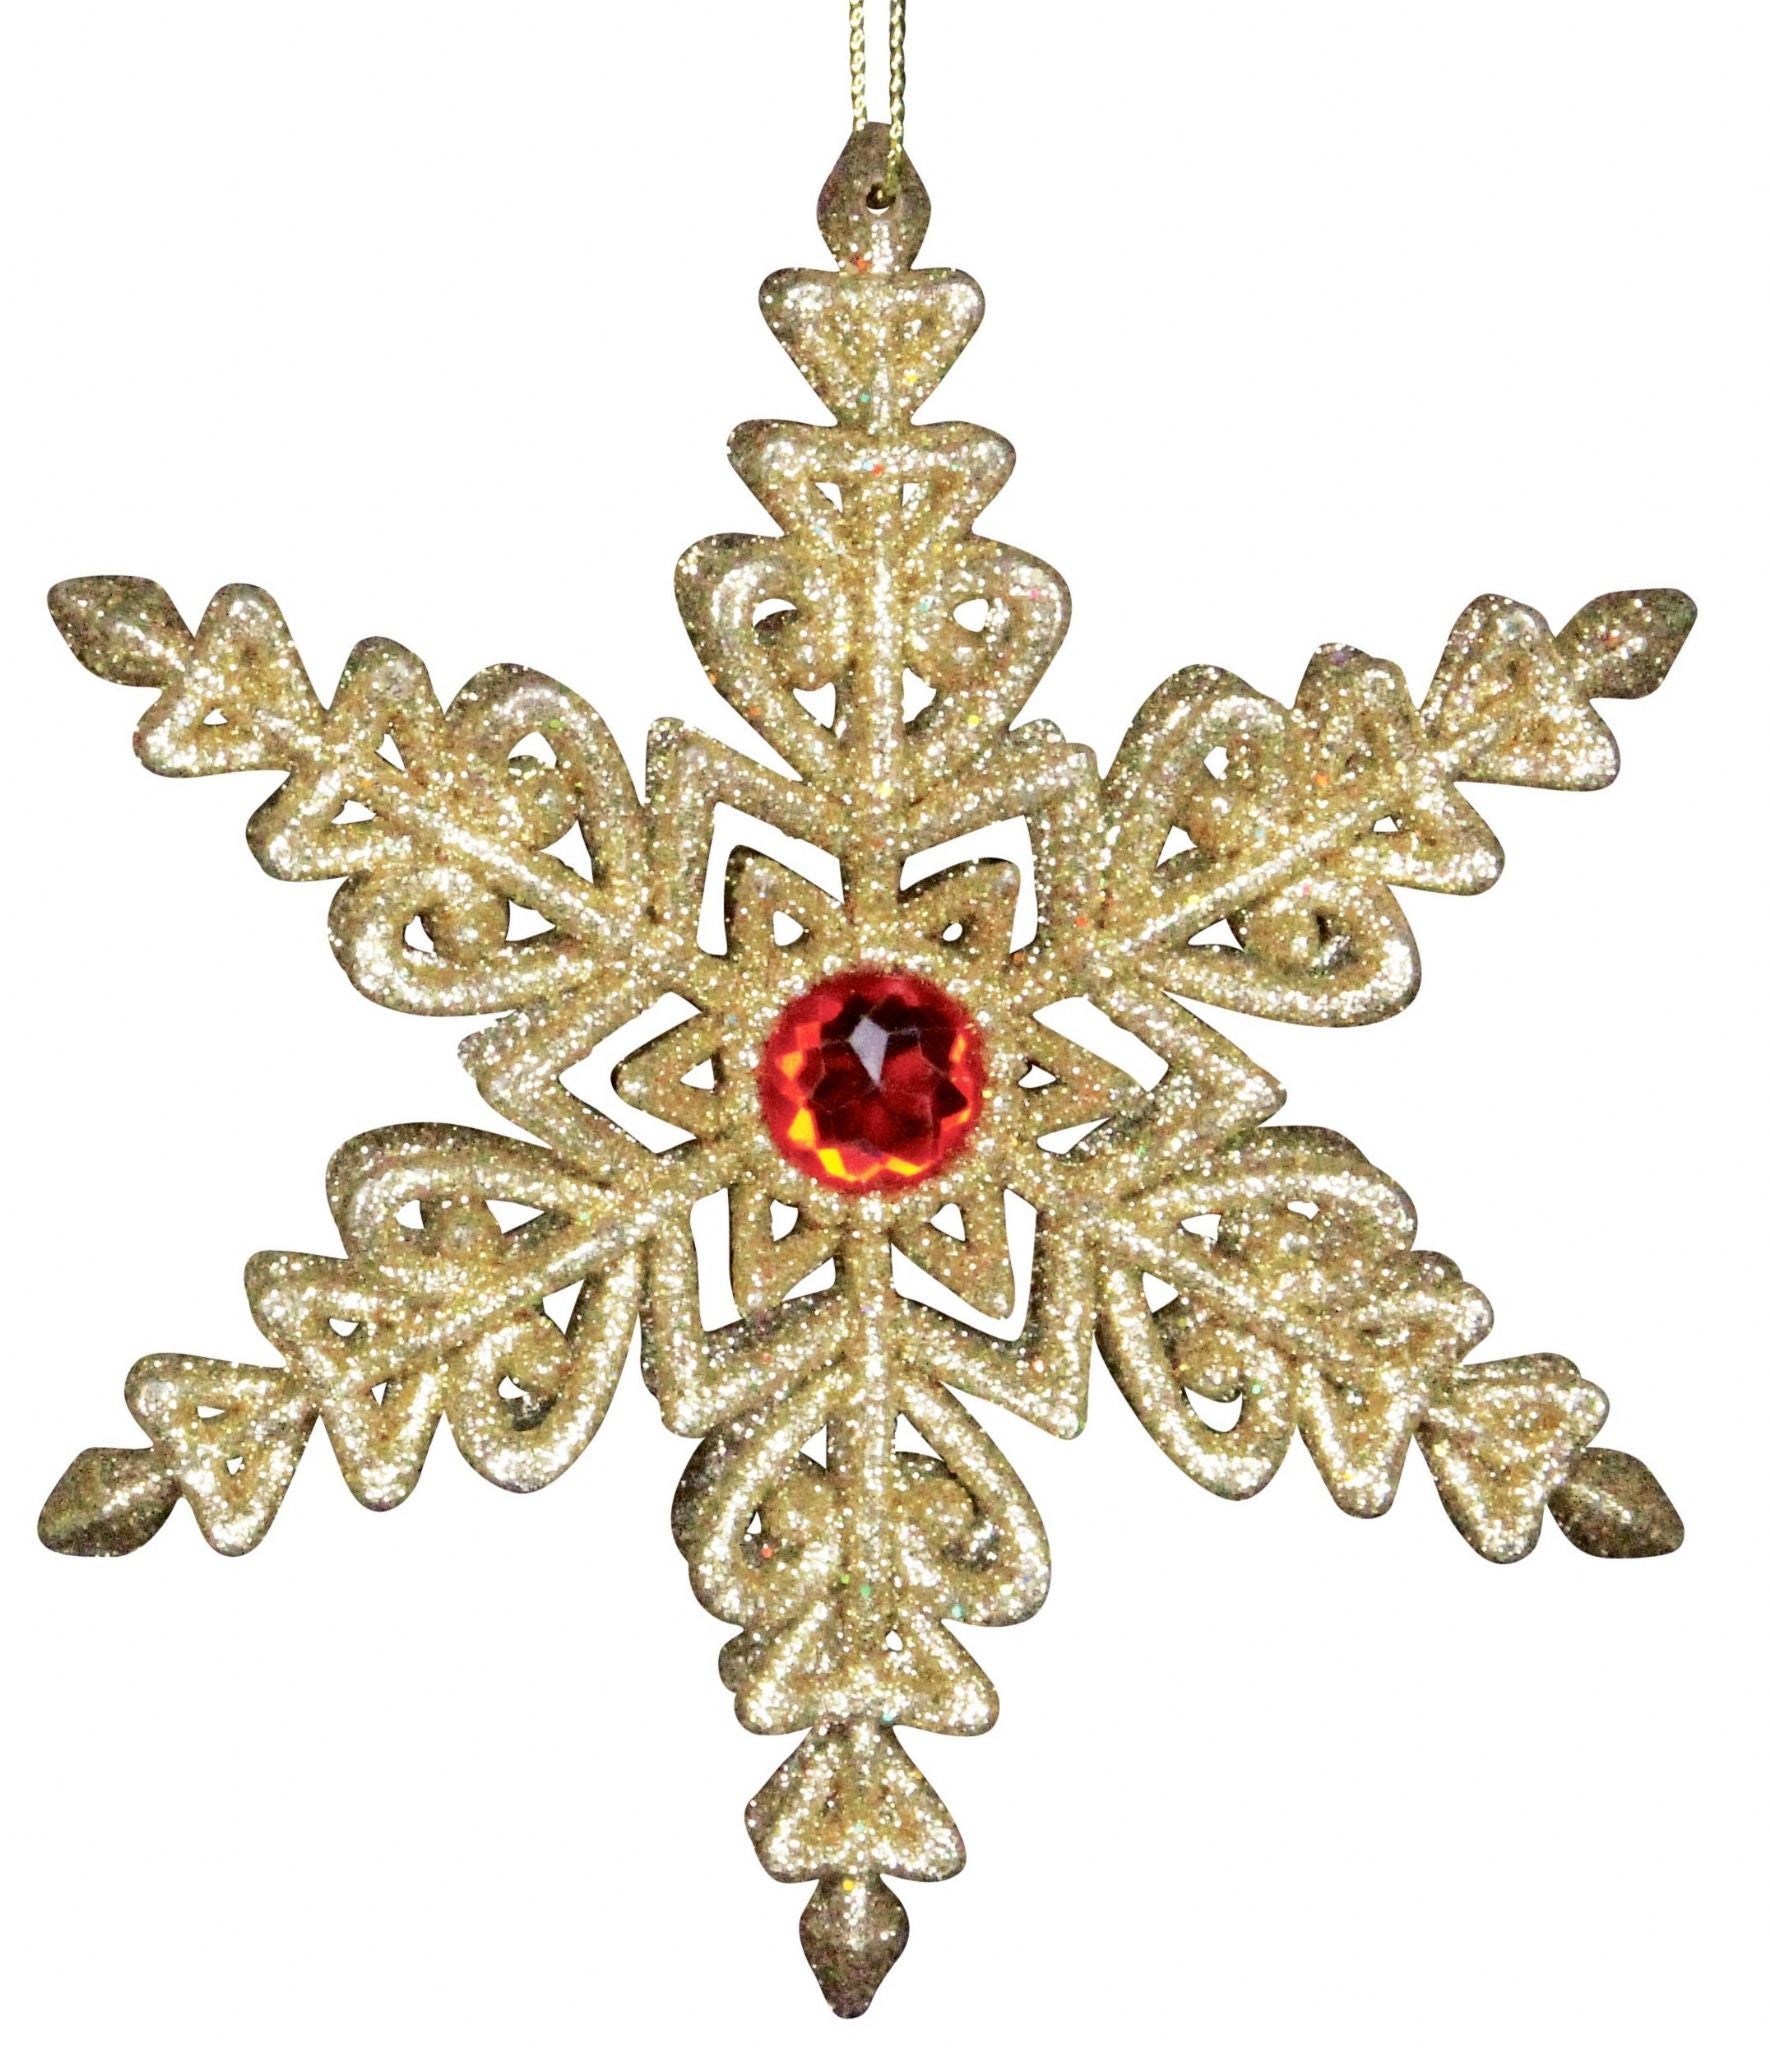 3D Gold Snowflake with Red Jewel